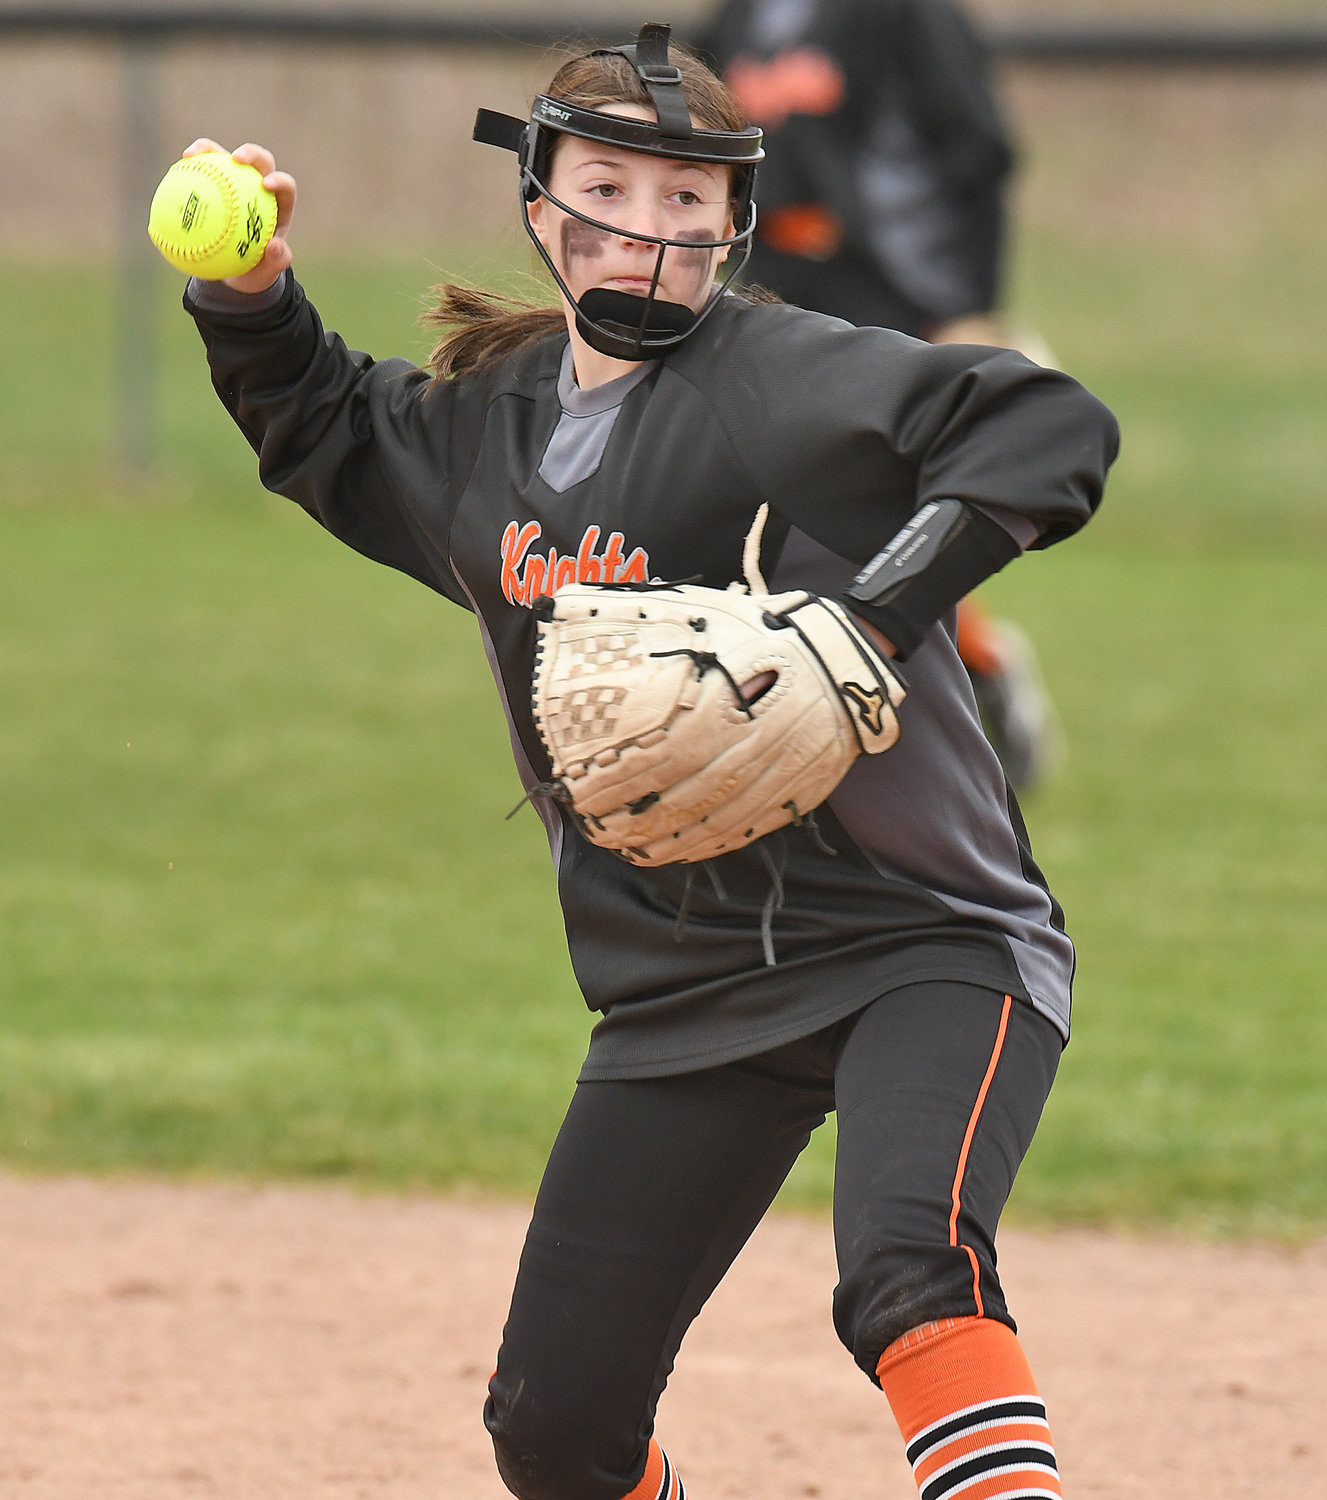 MAKING THE PLAY — Rome Free Academy second baseman Alexa Thompson makes the throw to first for an out in the team's 4-3 loss Monday at home against Fayetteville-Manlius.